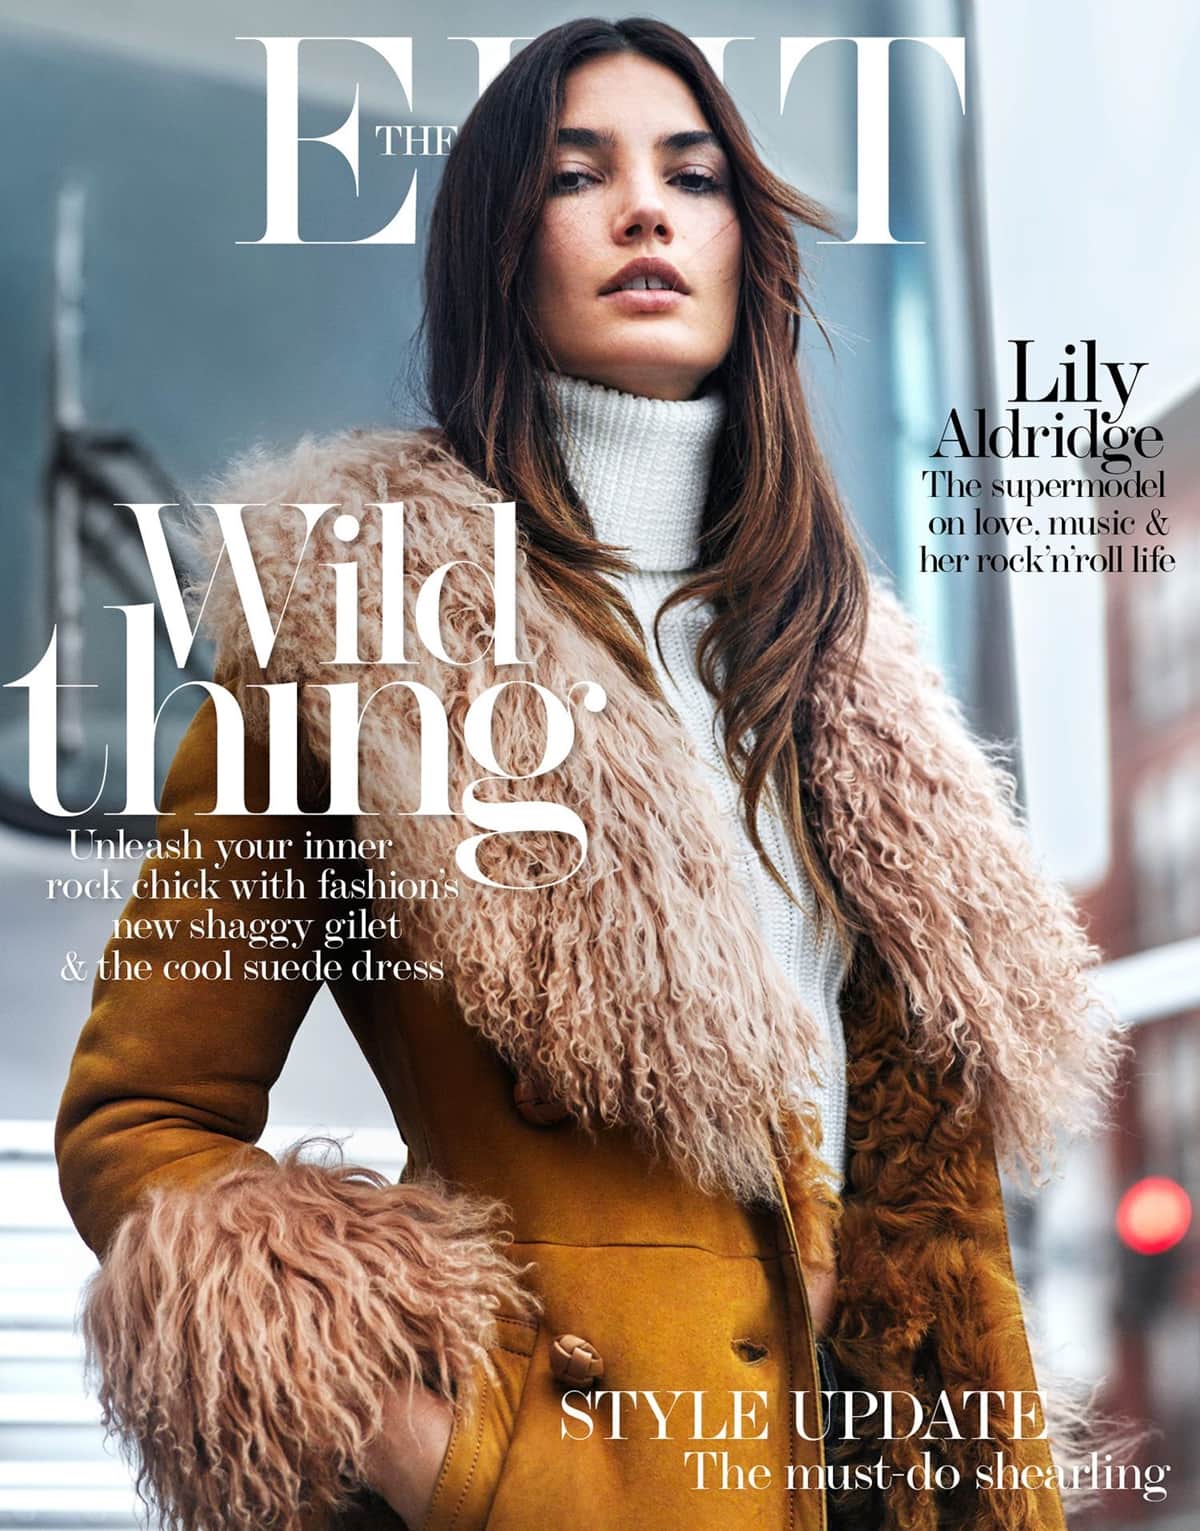 Lily Aldridge on the cover of Net-a-Porter’s The Edit magazine